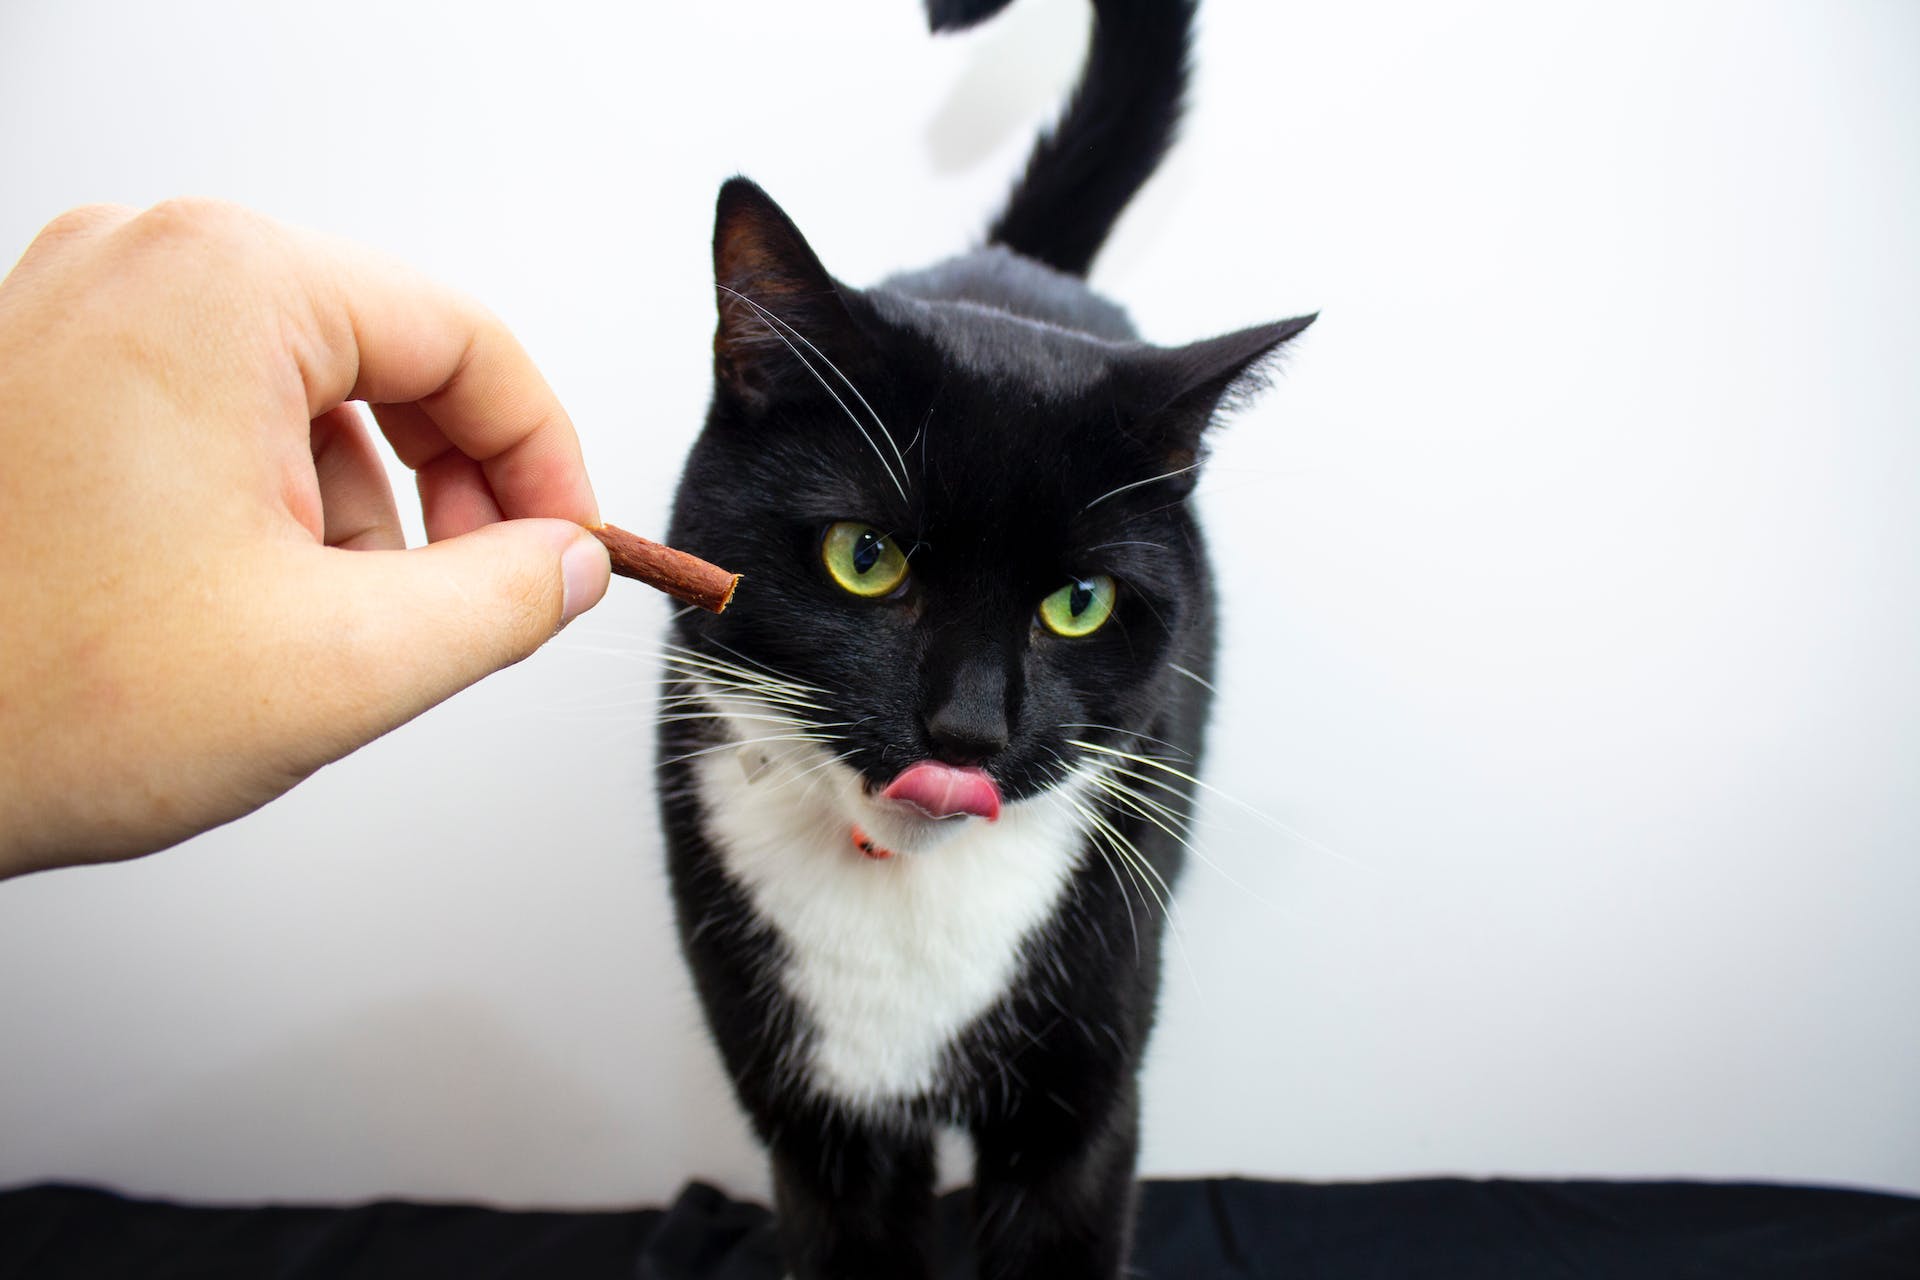 A man feeding a small treat to a black and white cat